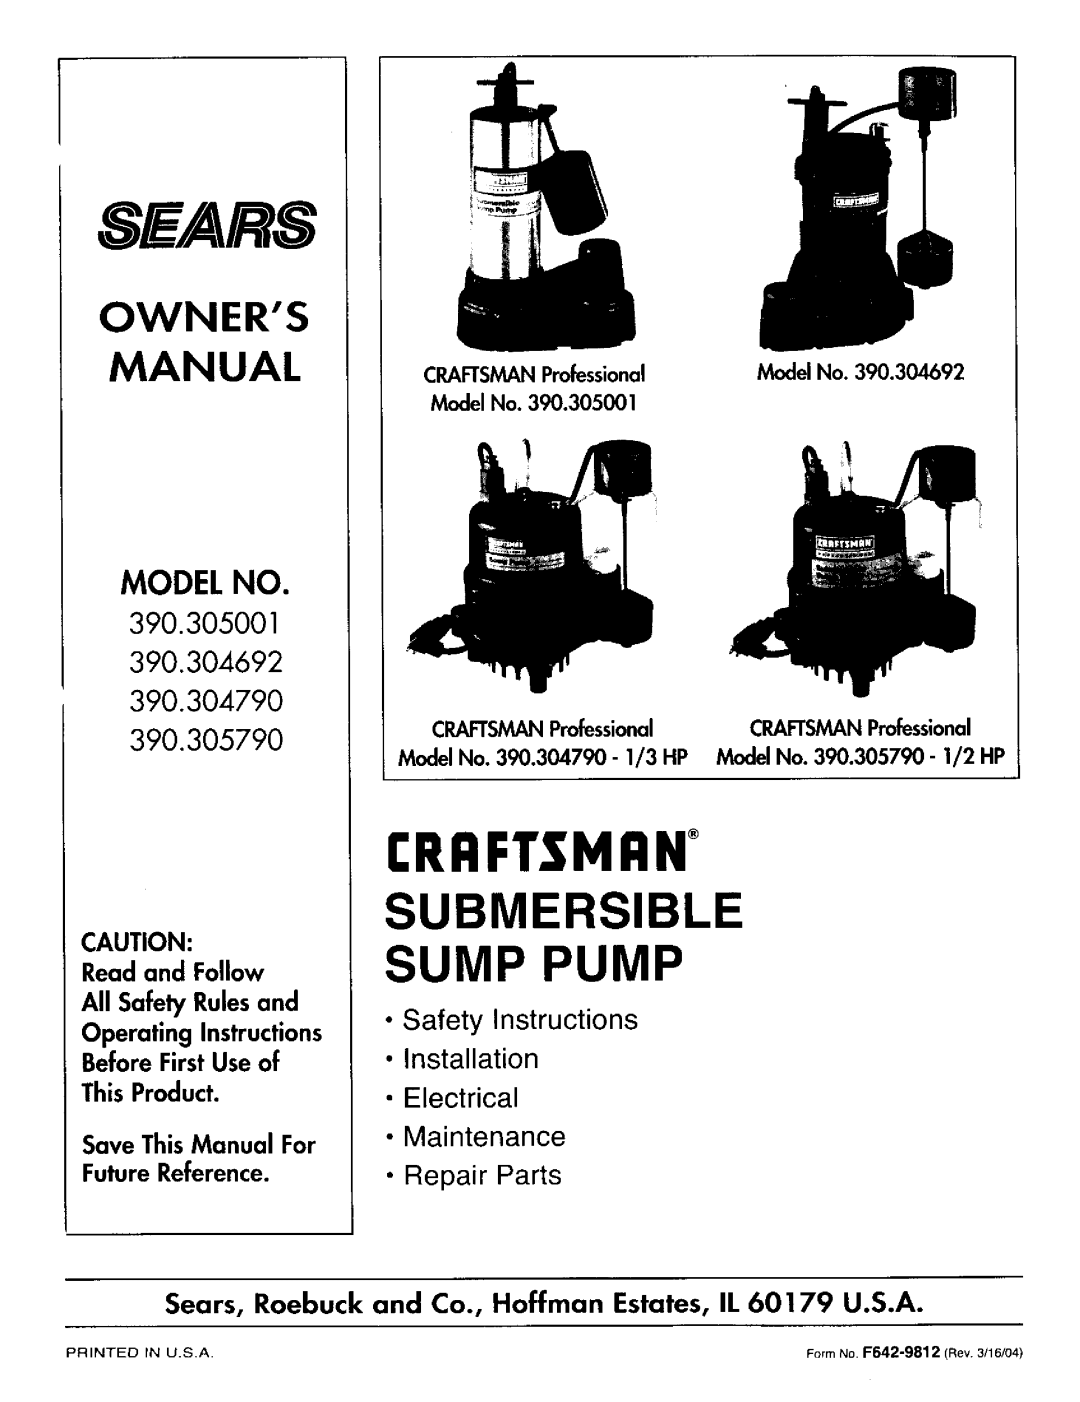 Sears owner manual Rrftsmrw, Submersible, Owners Manual, 390.305001 390.304692 390.304790 390.305790, SE/41RS, Model No 